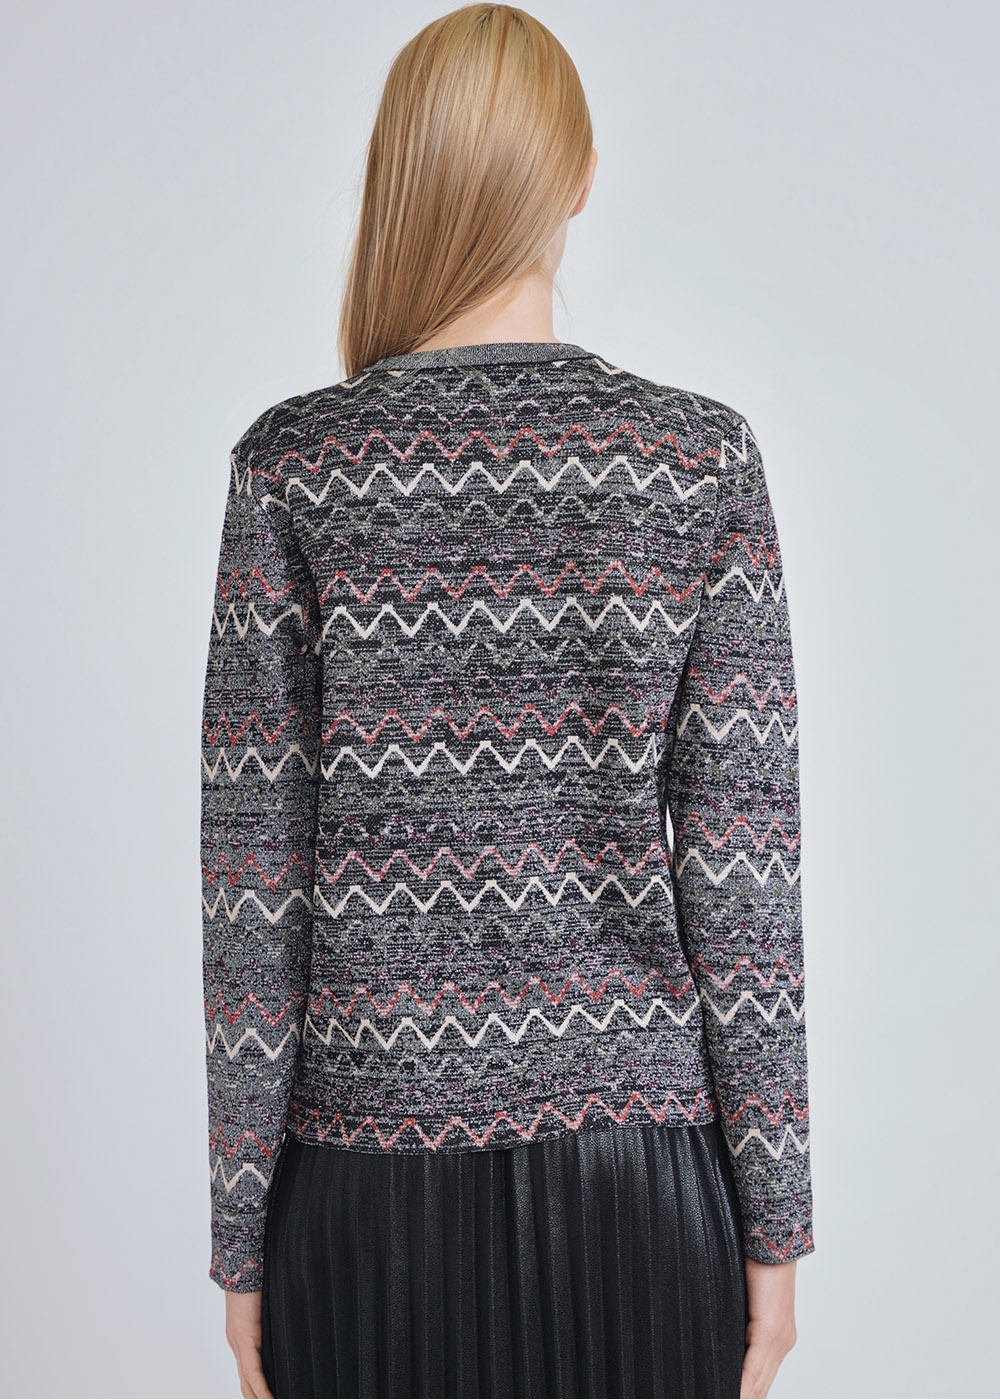 Dynamic Zigzag Patterned Silver Top